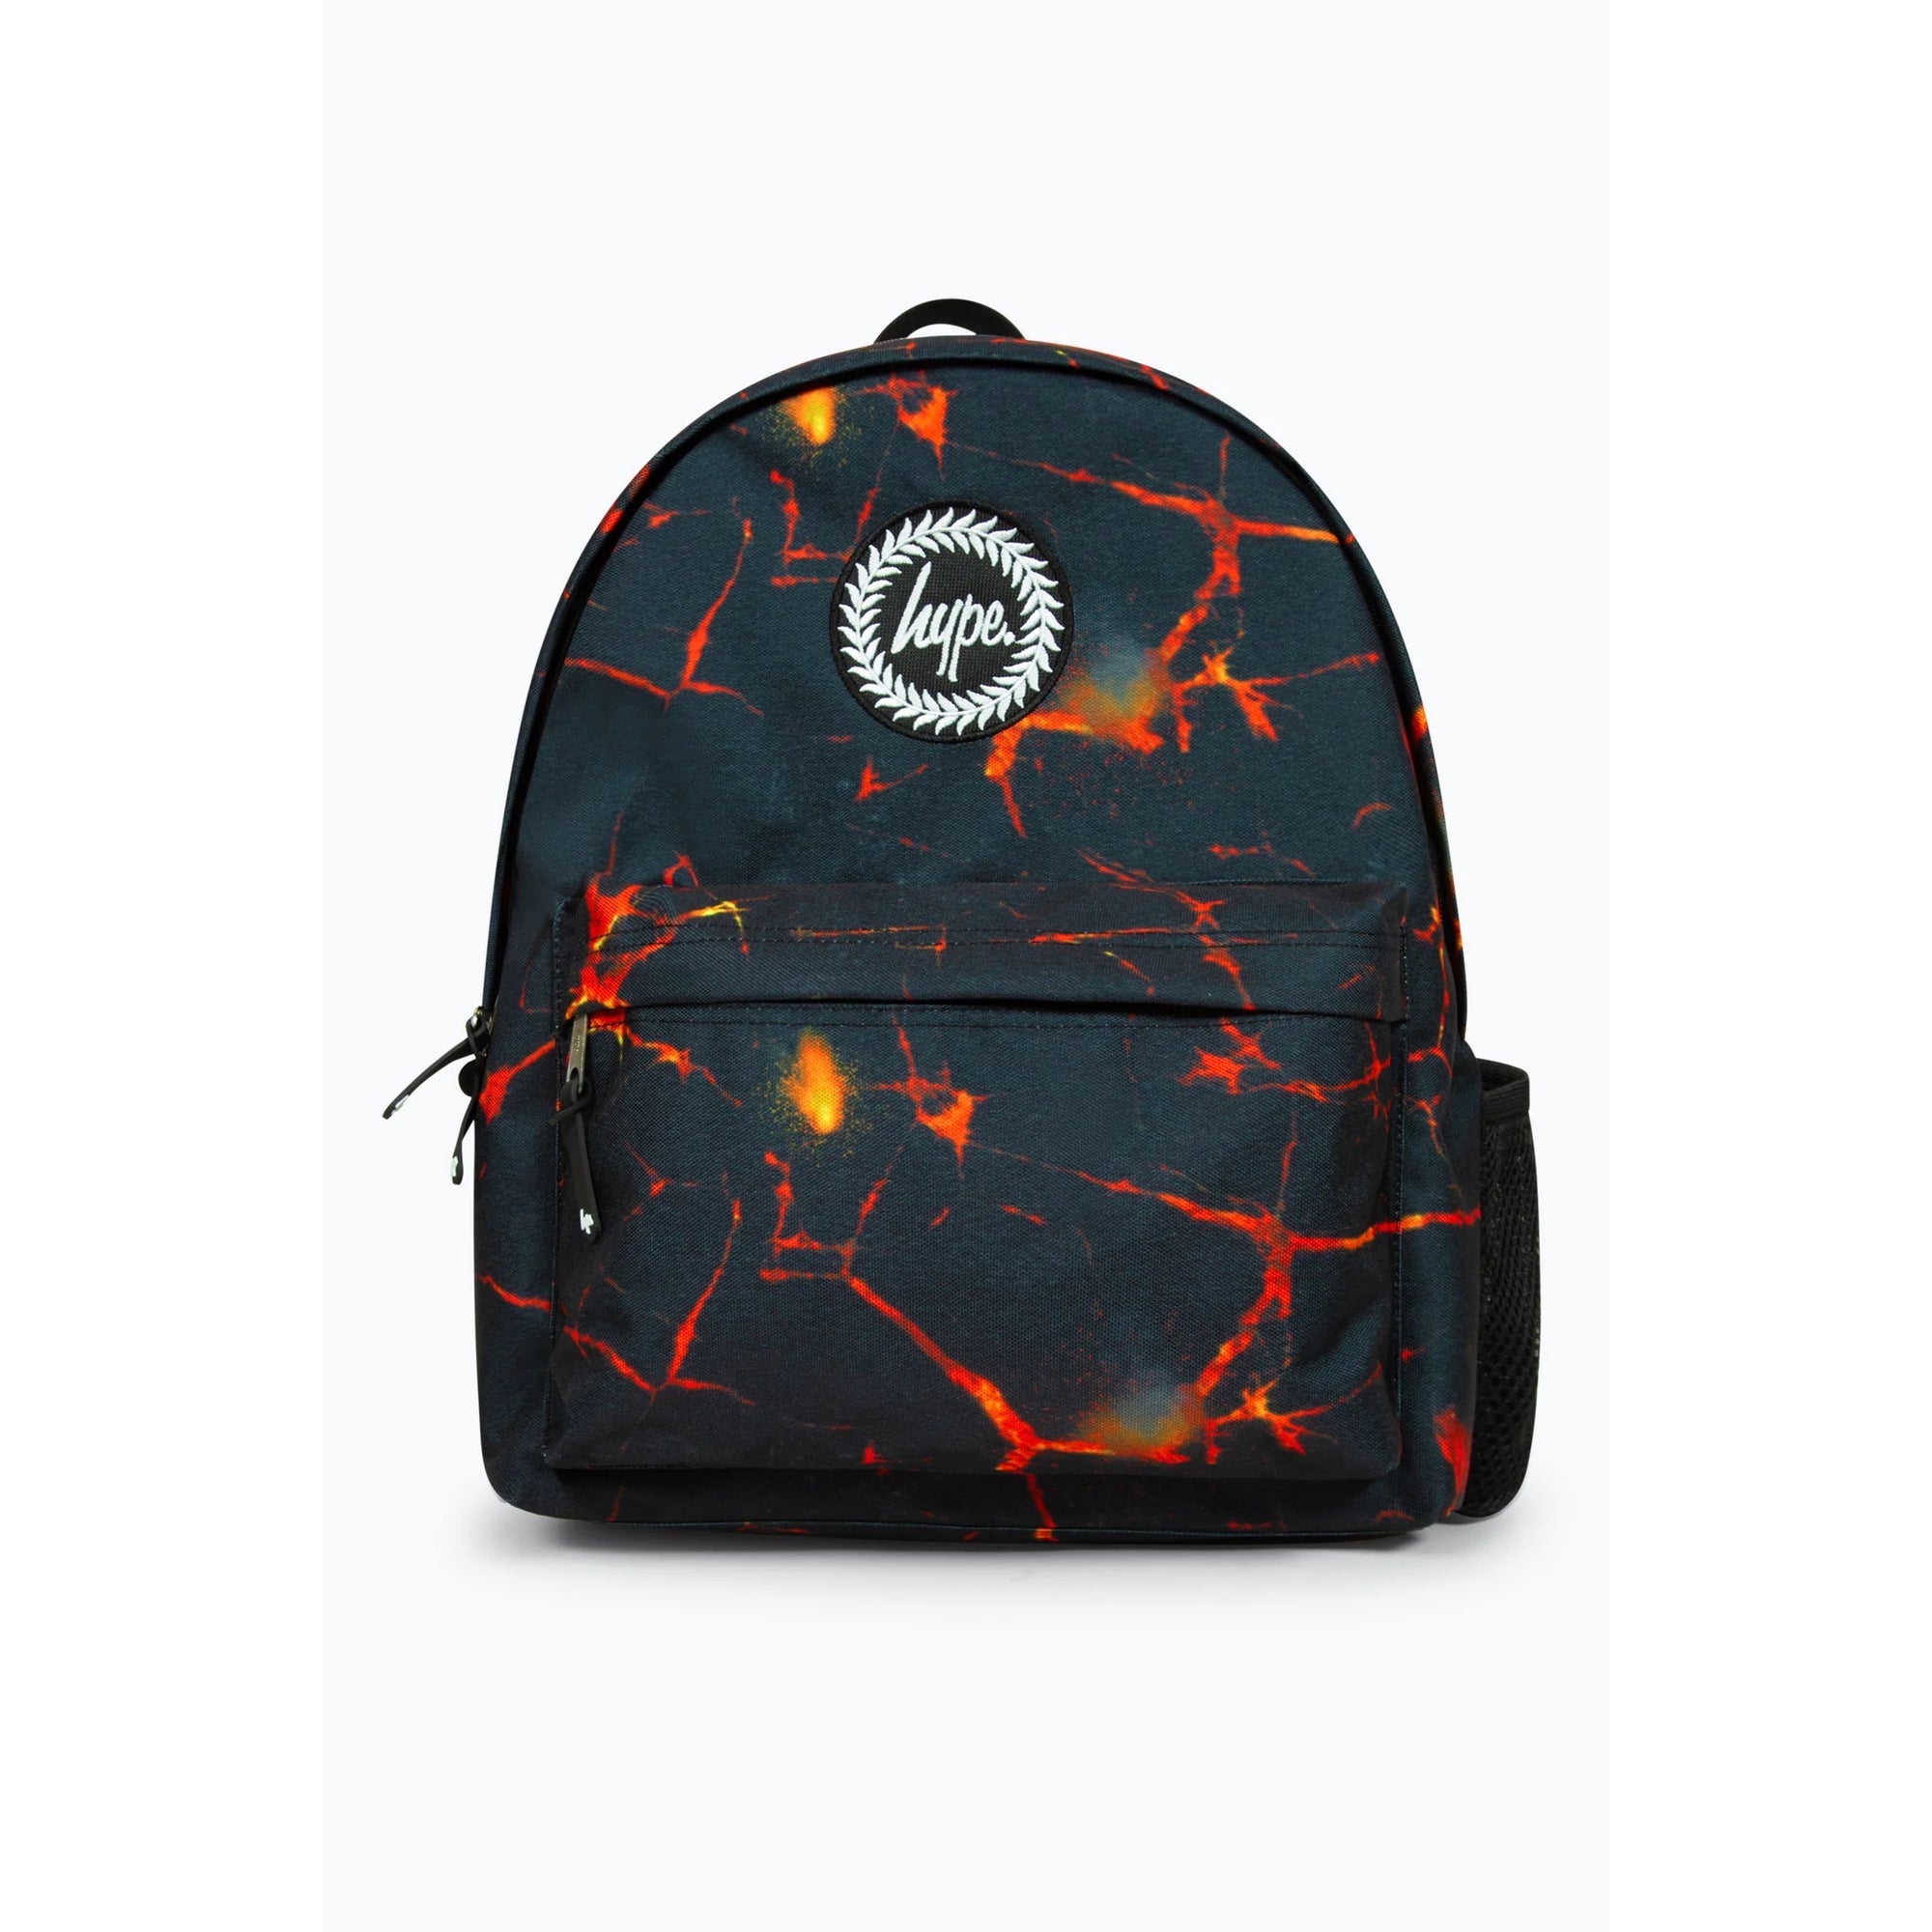 Hype Black Lava Backpack Rtlr197 Accessories ONE SIZE / Black